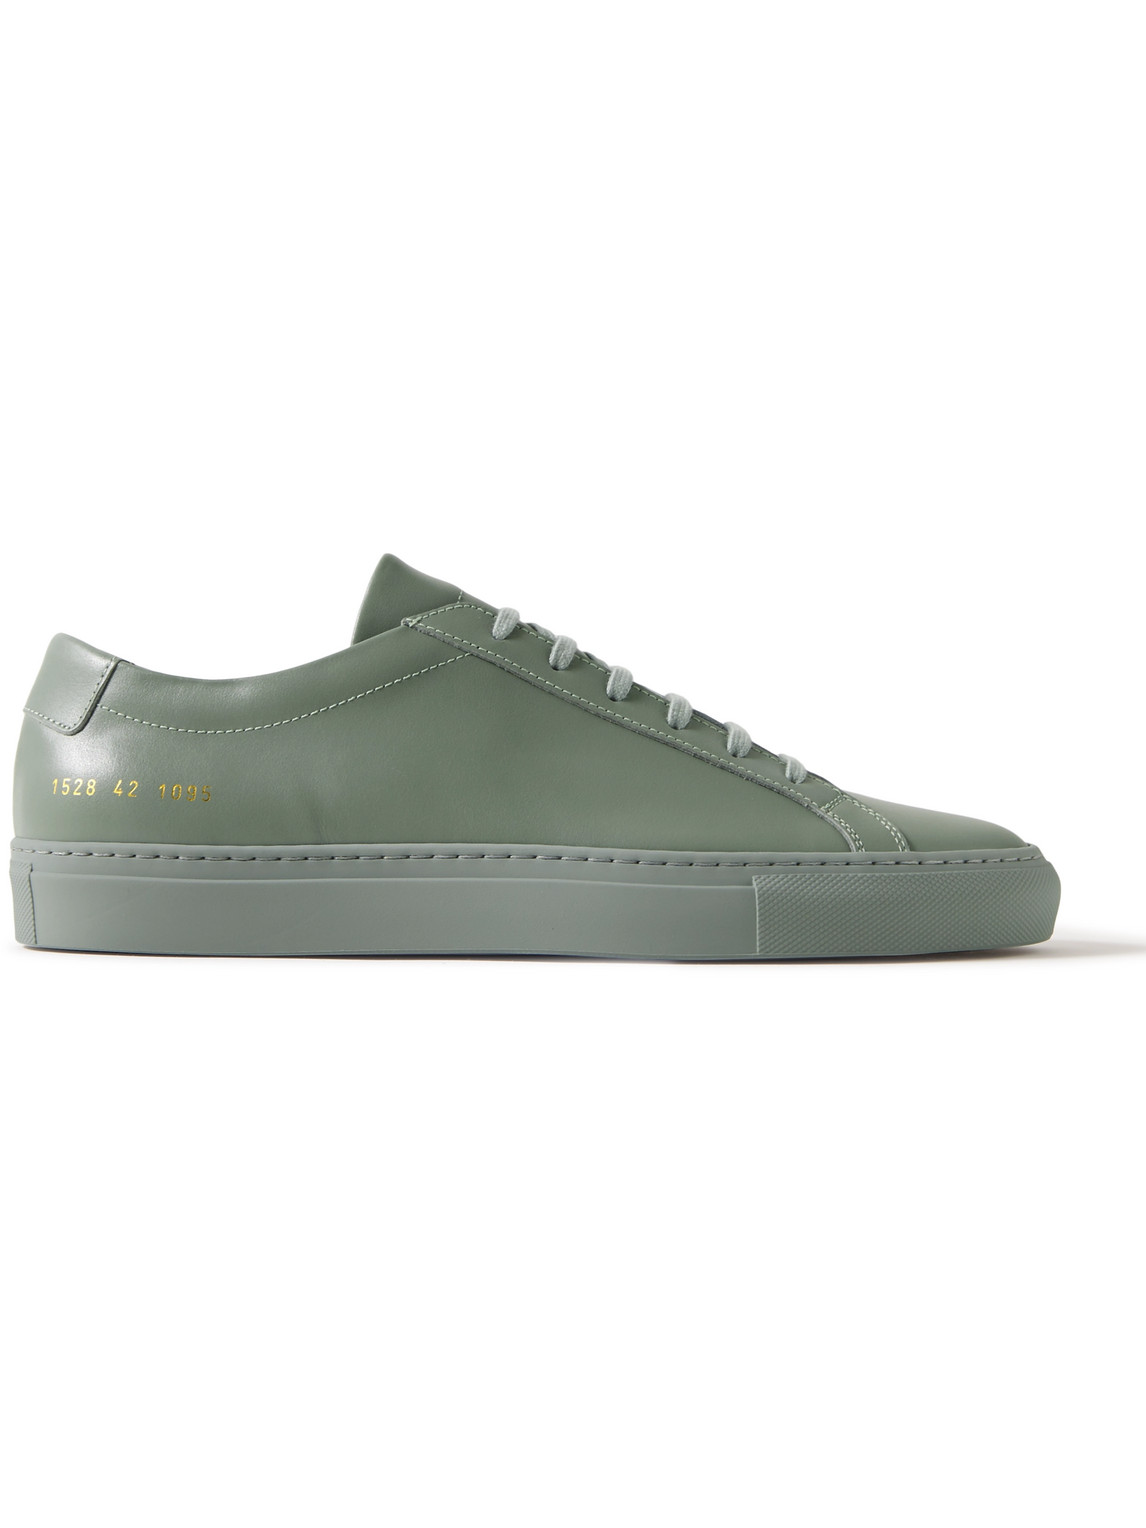 Common Projects Original Achilles Leather Trainers In Green